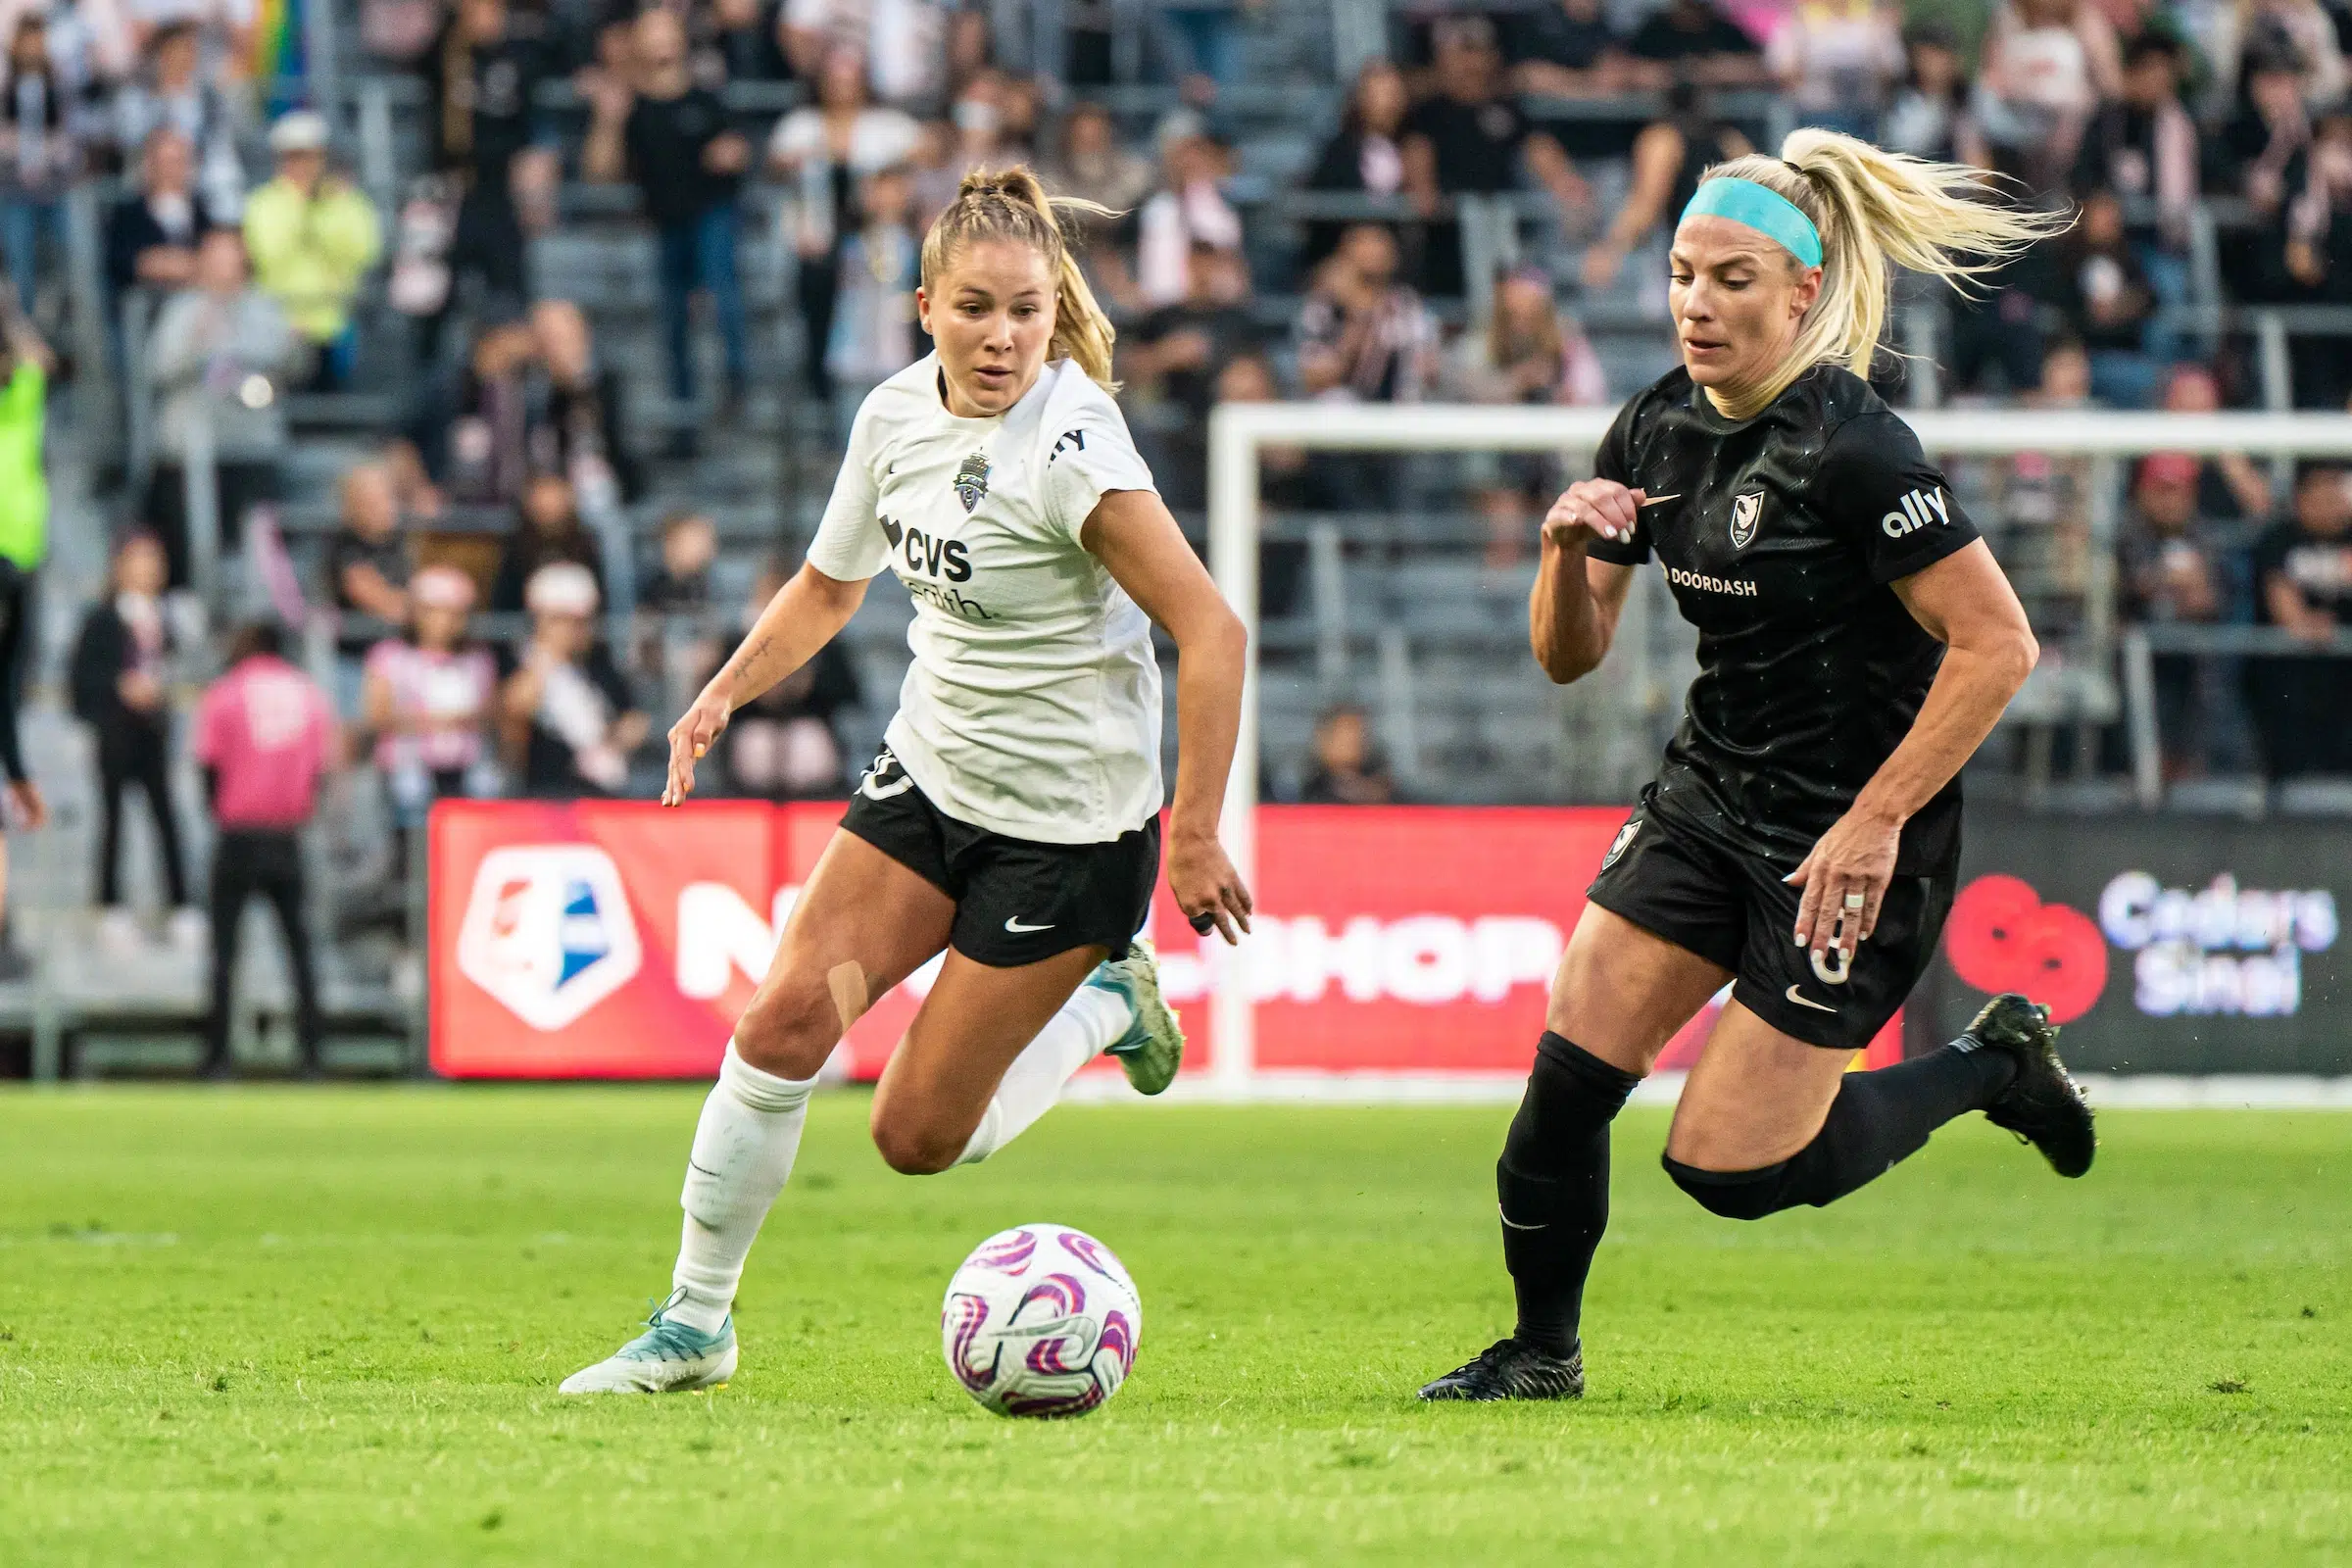 Ashley Hatch in a white top, black shorts and white socks attempts to dribble past Julie Ertz in a black uniform.